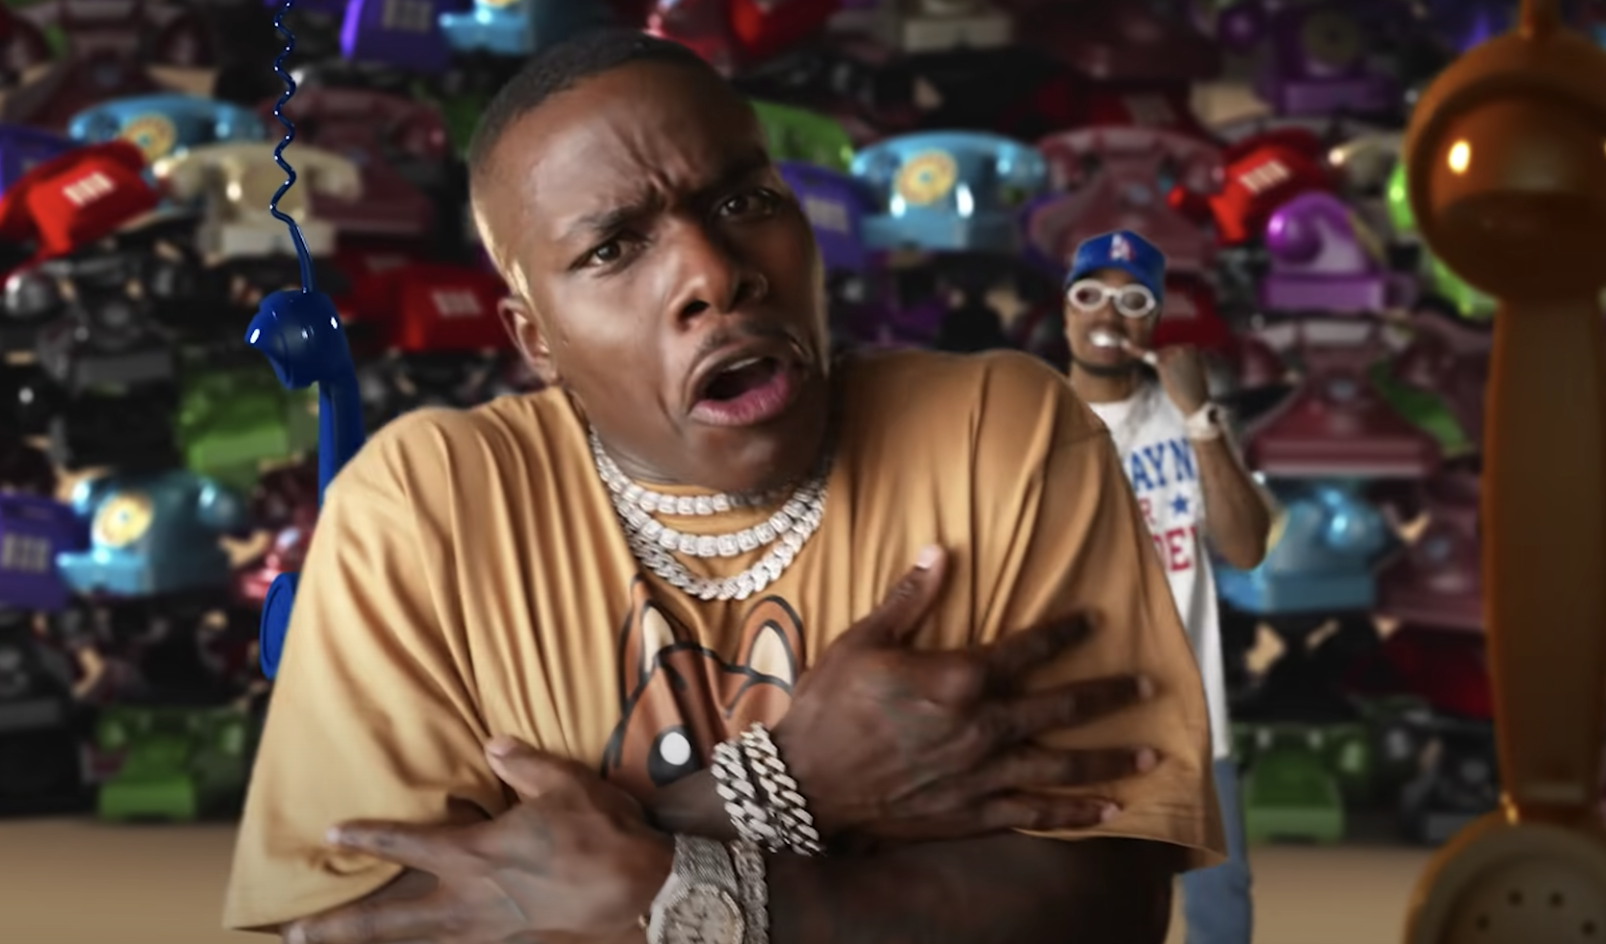 SPOTTED: DaBaby Rocks Drew House in ‘Pick Up’ Visuals